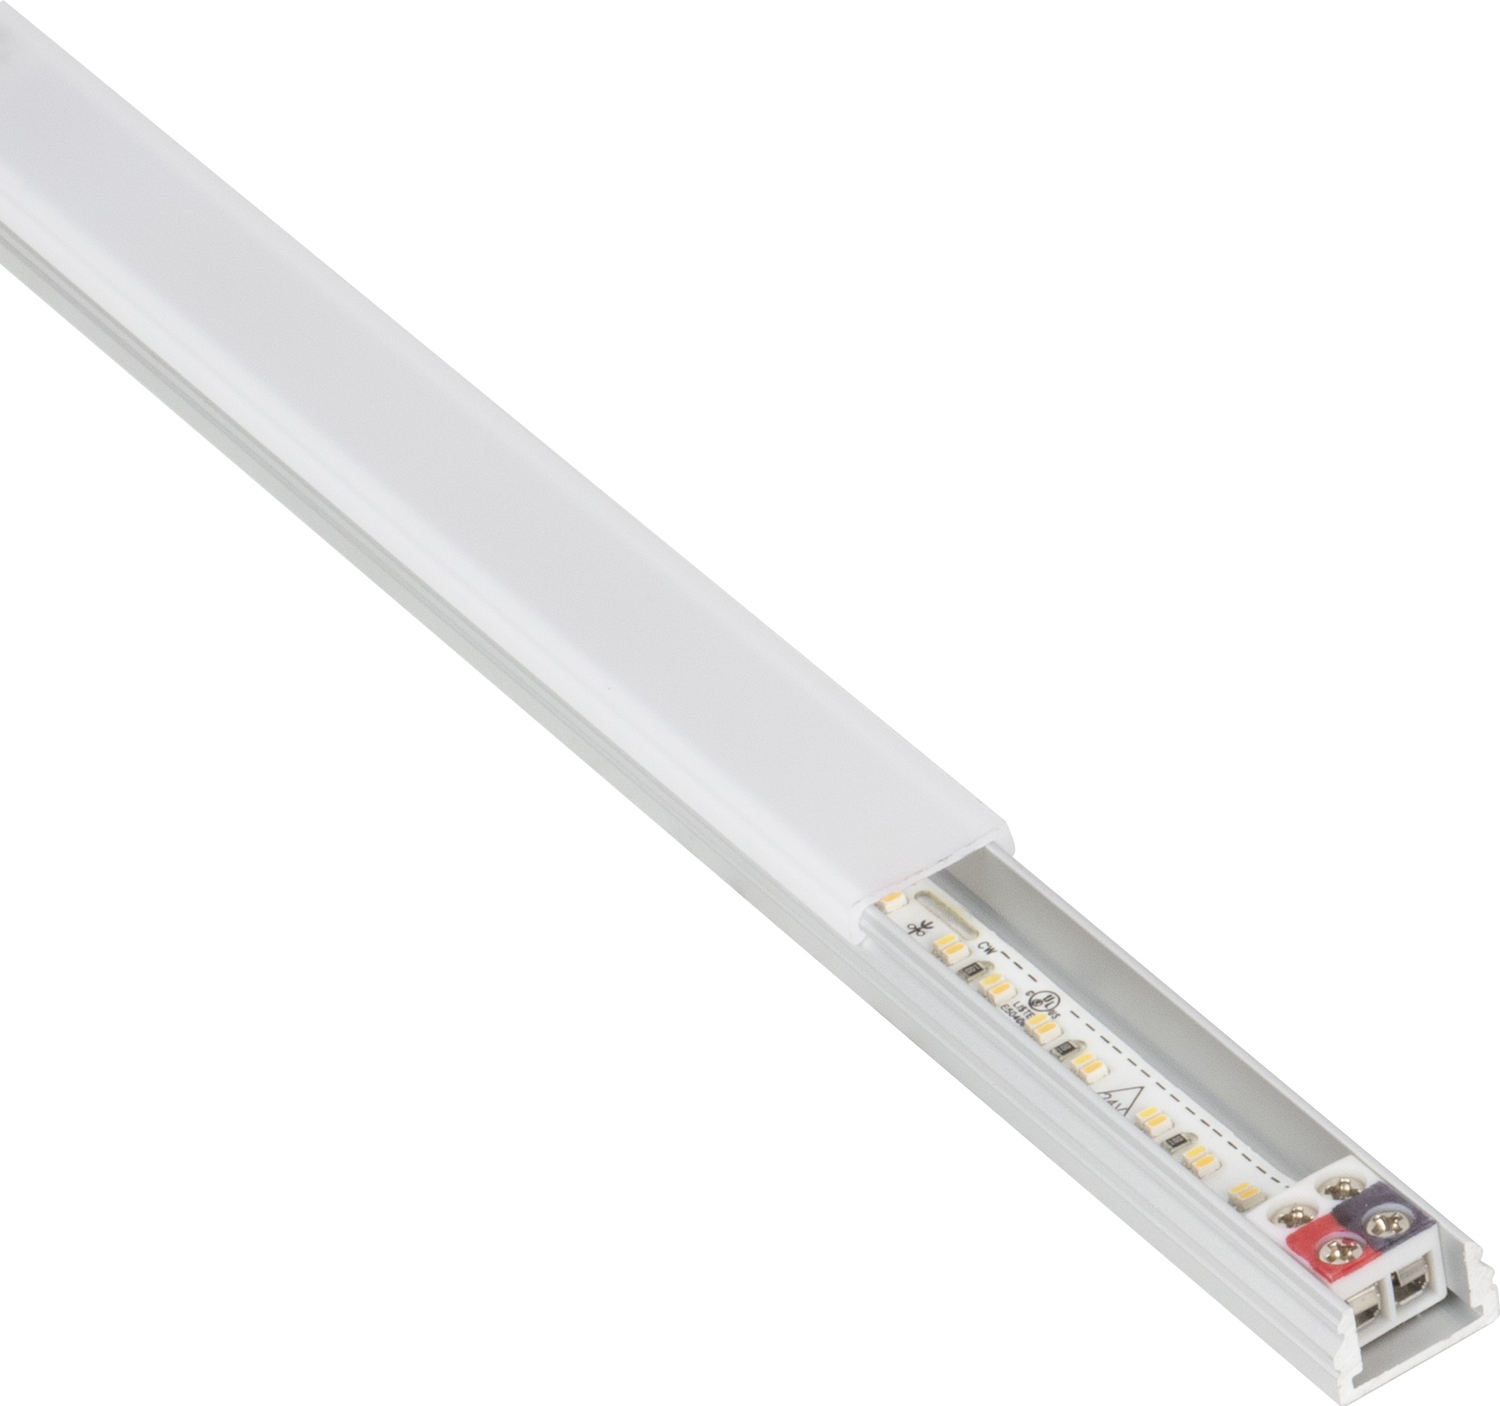 contemporary lights for kitchen Task Lighting Linear Fixtures;Tunable-white Lighting Aluminum